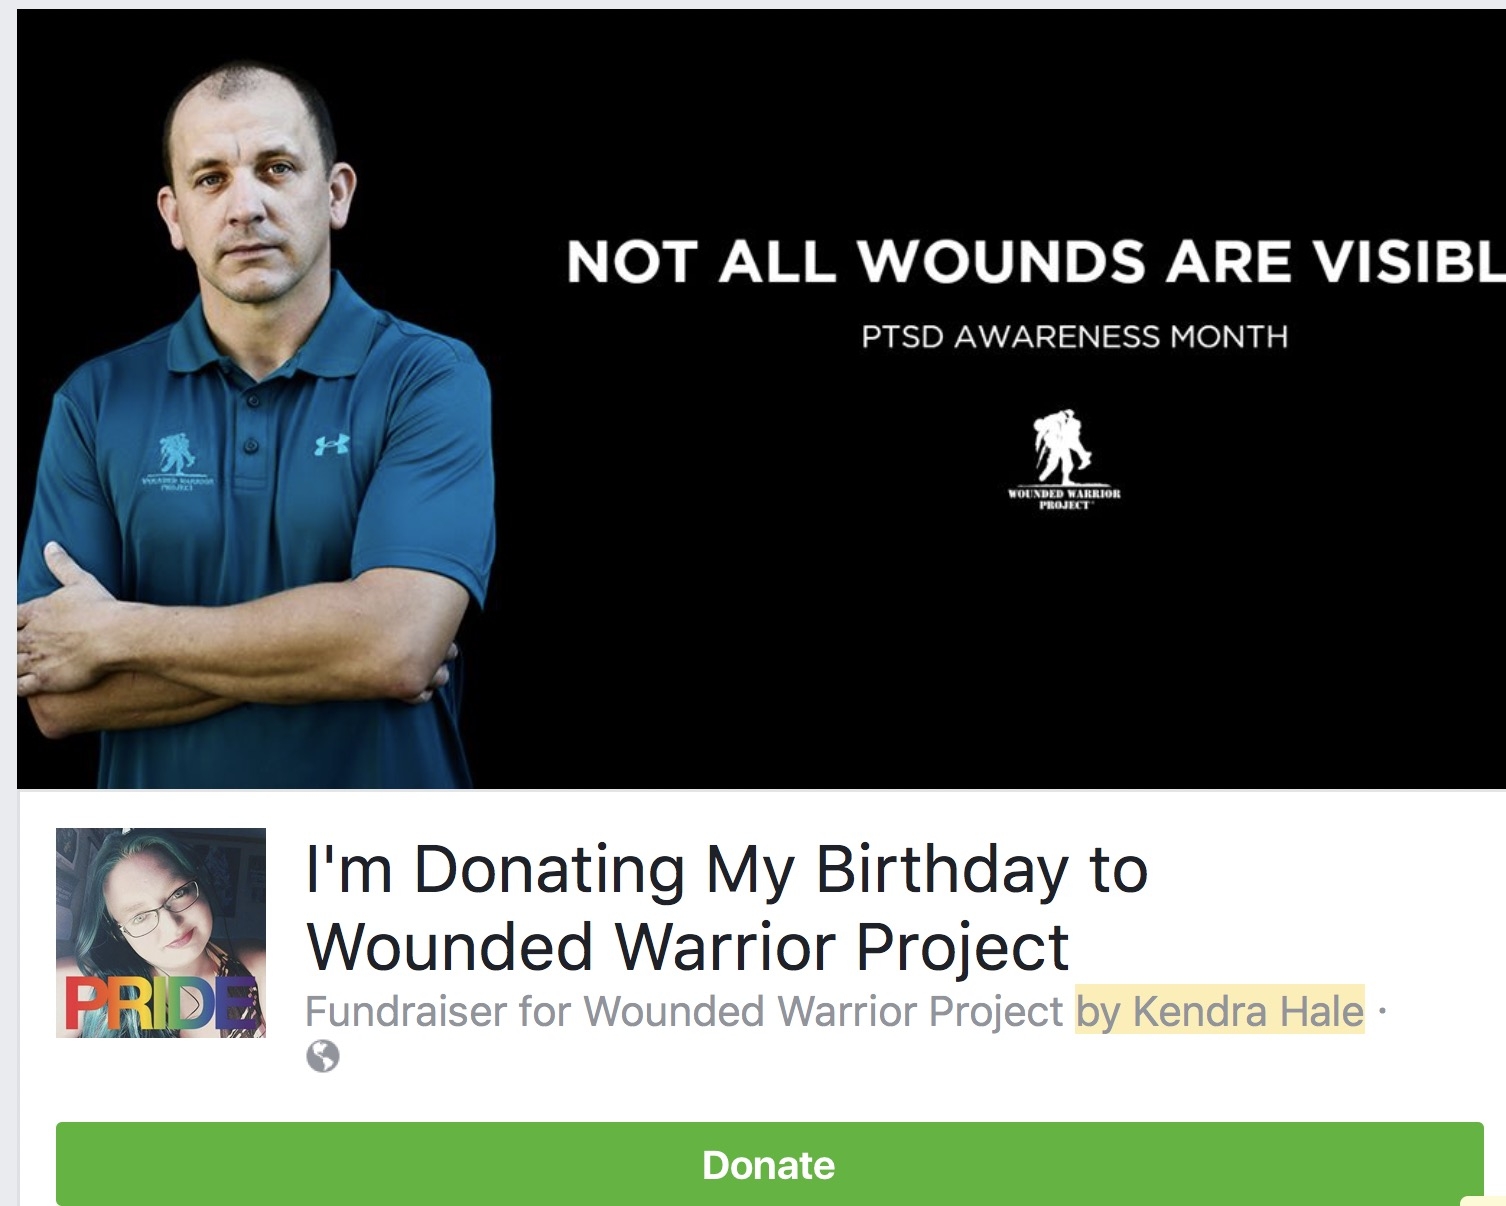 I’m Donating My Birthday to Wounded Warrior Project-by Kendra Hale